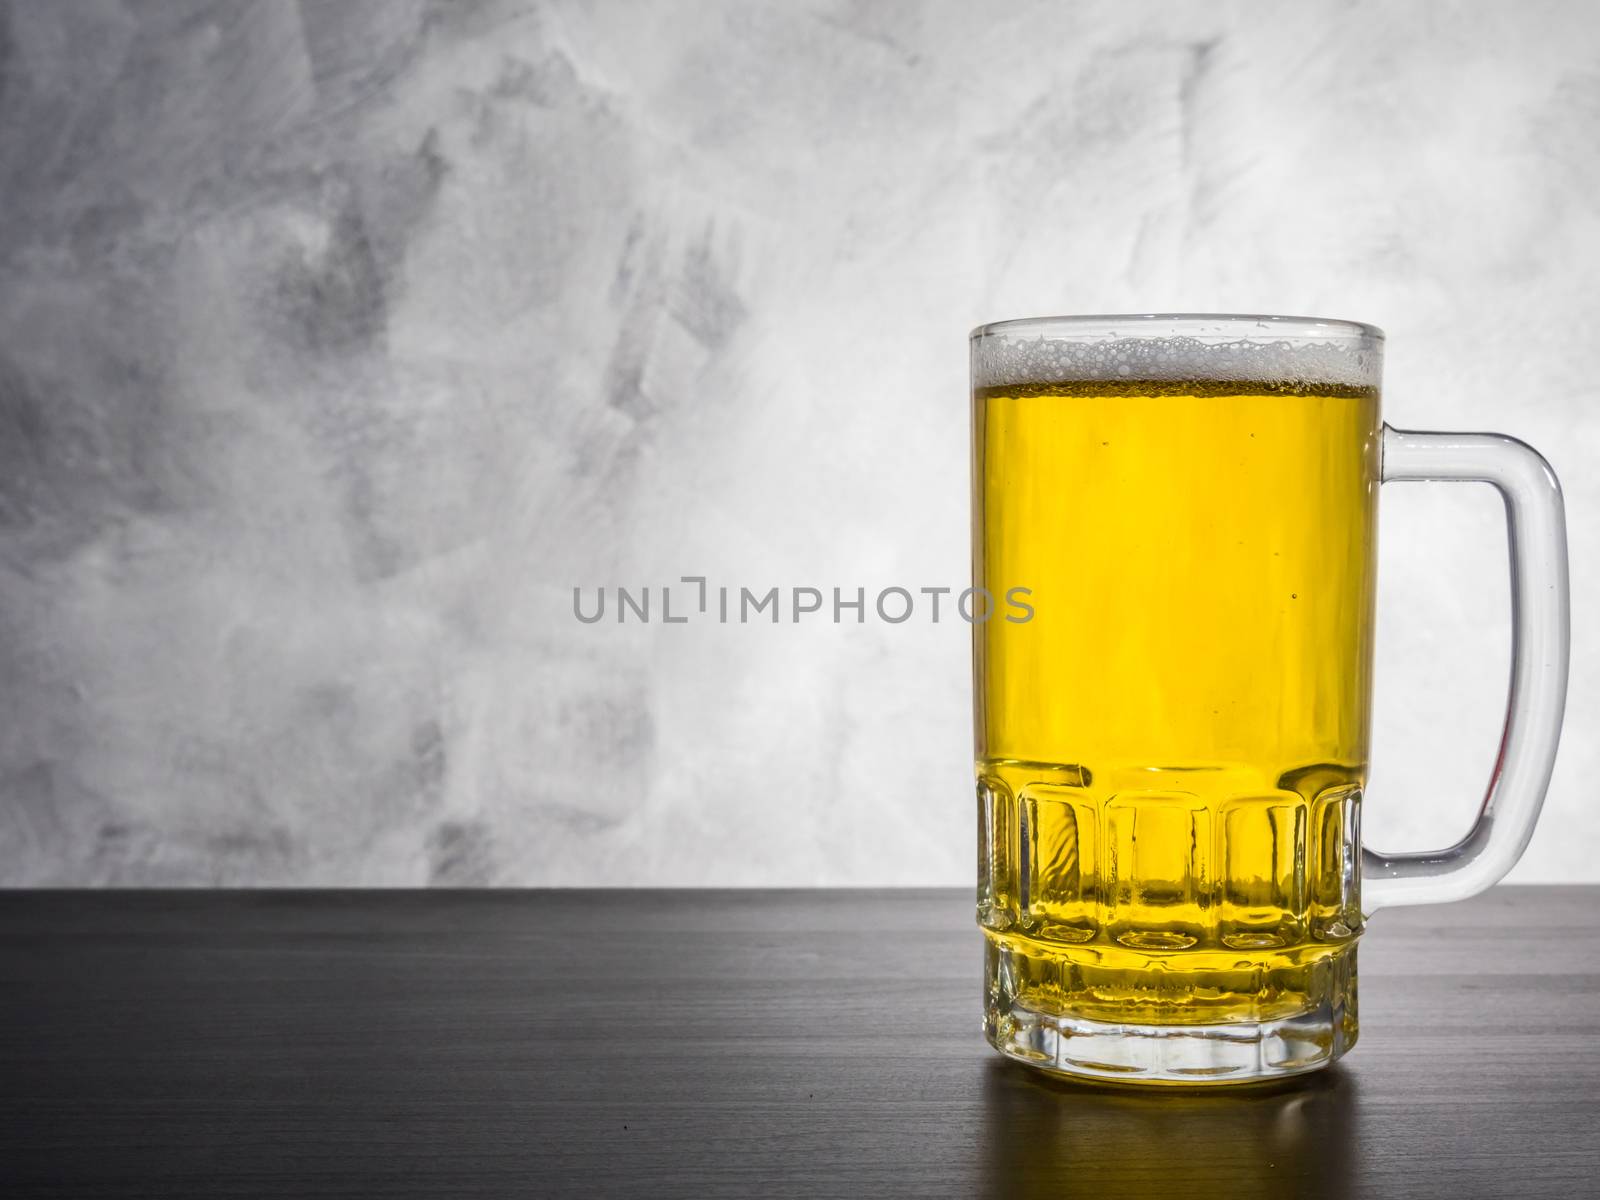 Glass of beer on a grunge background. by ronnarong